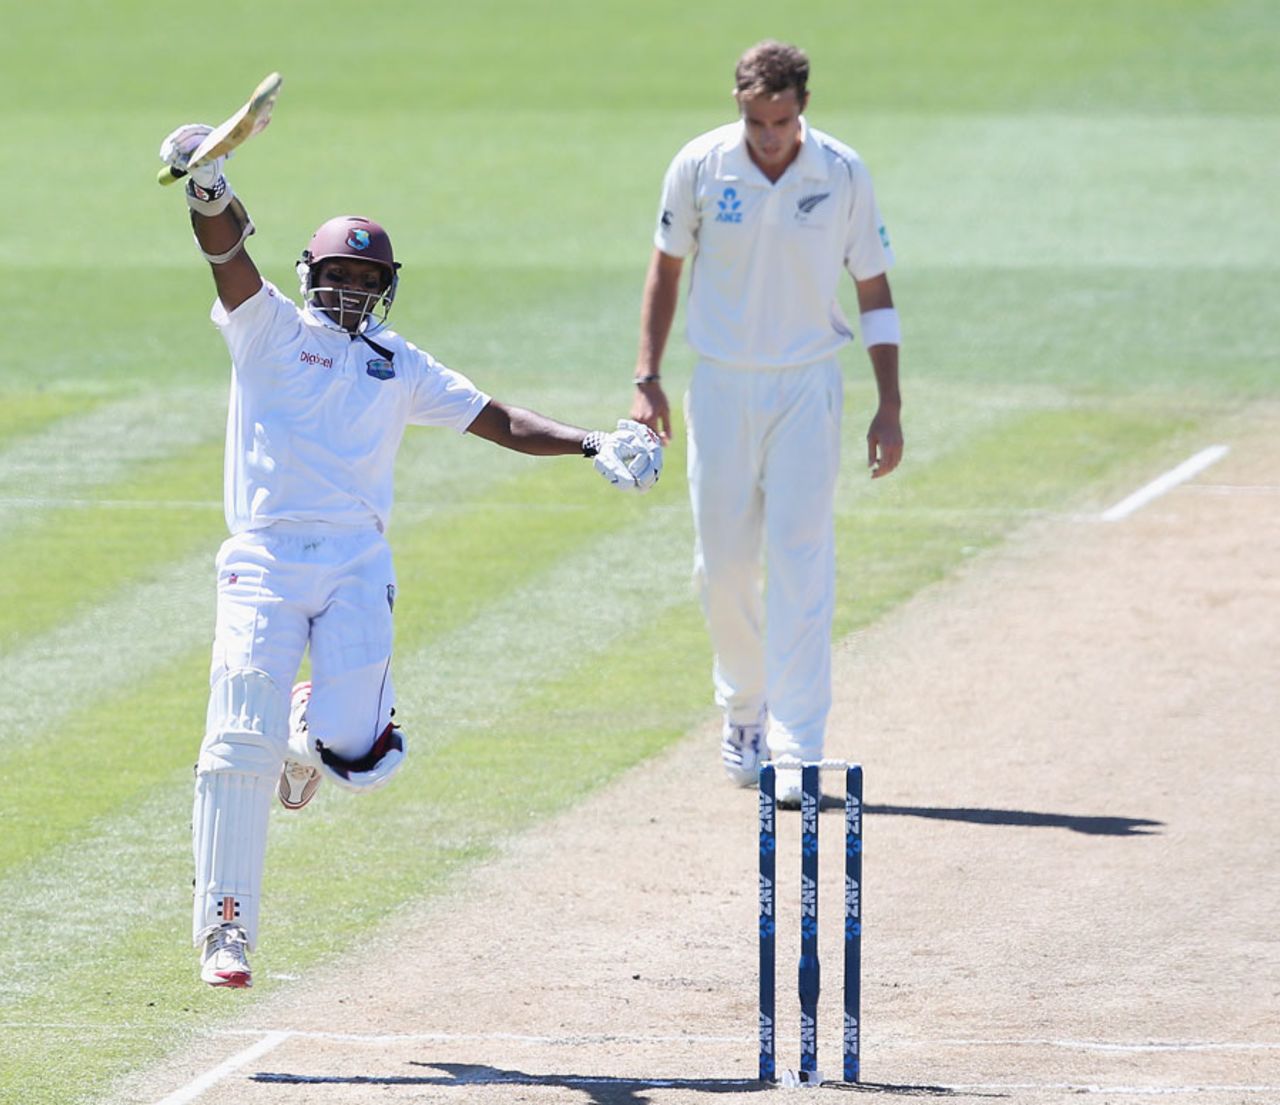 Shivnarine Chanderpaul celebrates after reaching his 29th Test century, New Zealand v West Indies, 3rd Test, Hamilton, 2nd day, December 20, 2013